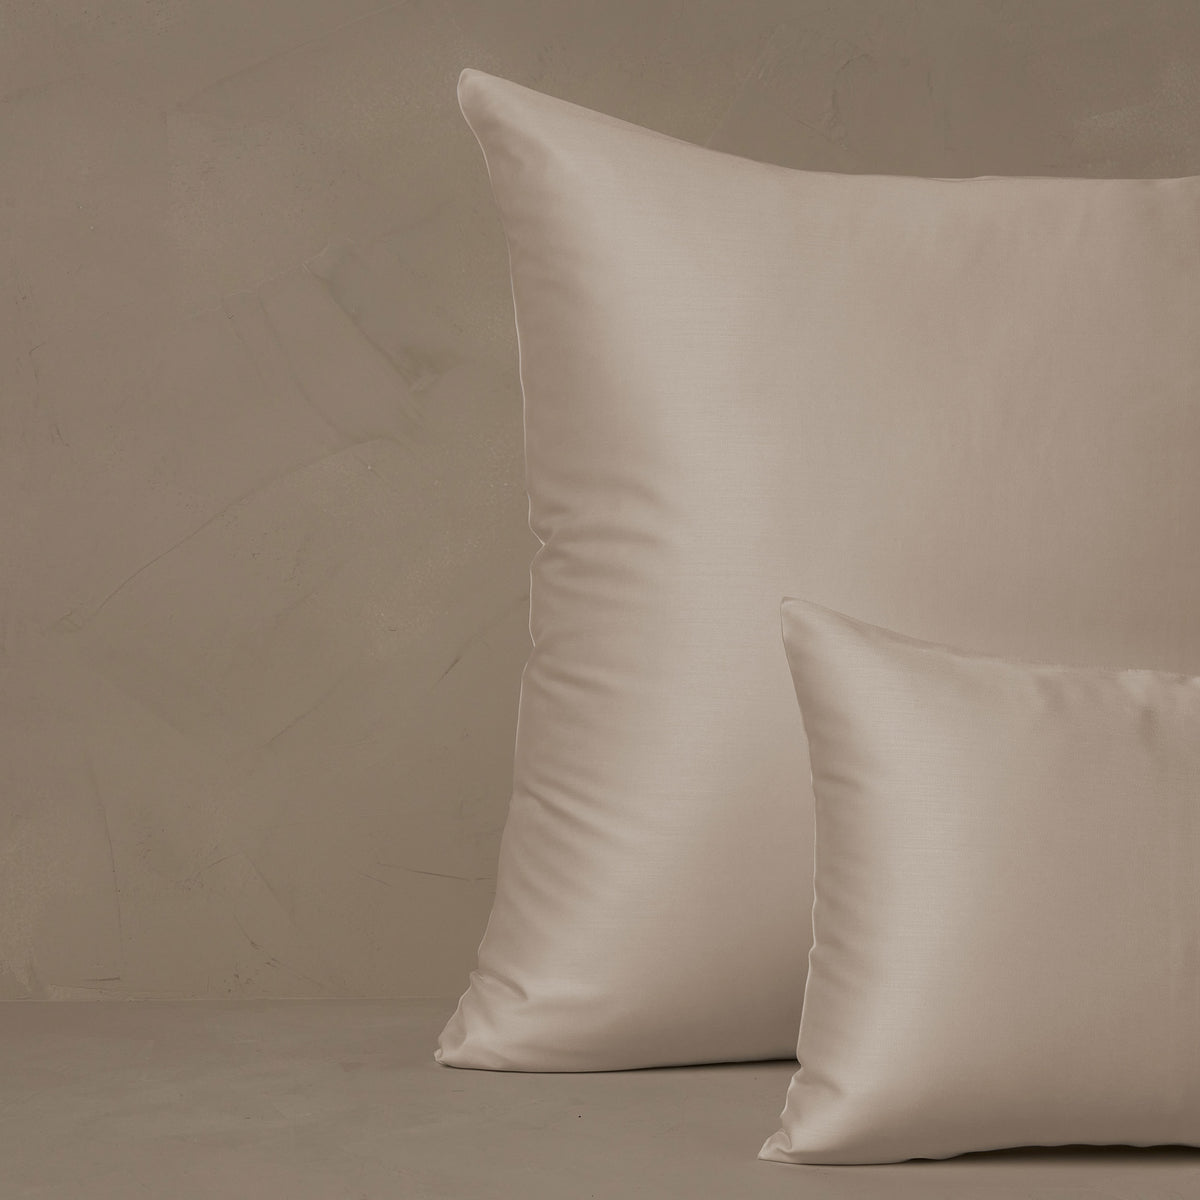 An image of a small boudoir or travel size pillow stacked in front of a large euro size pillow. The pillow cases are made in Italy of LETTO Woodland Silk fabric in color ivory, a smooth and silky beechwood modal. data-image-id=